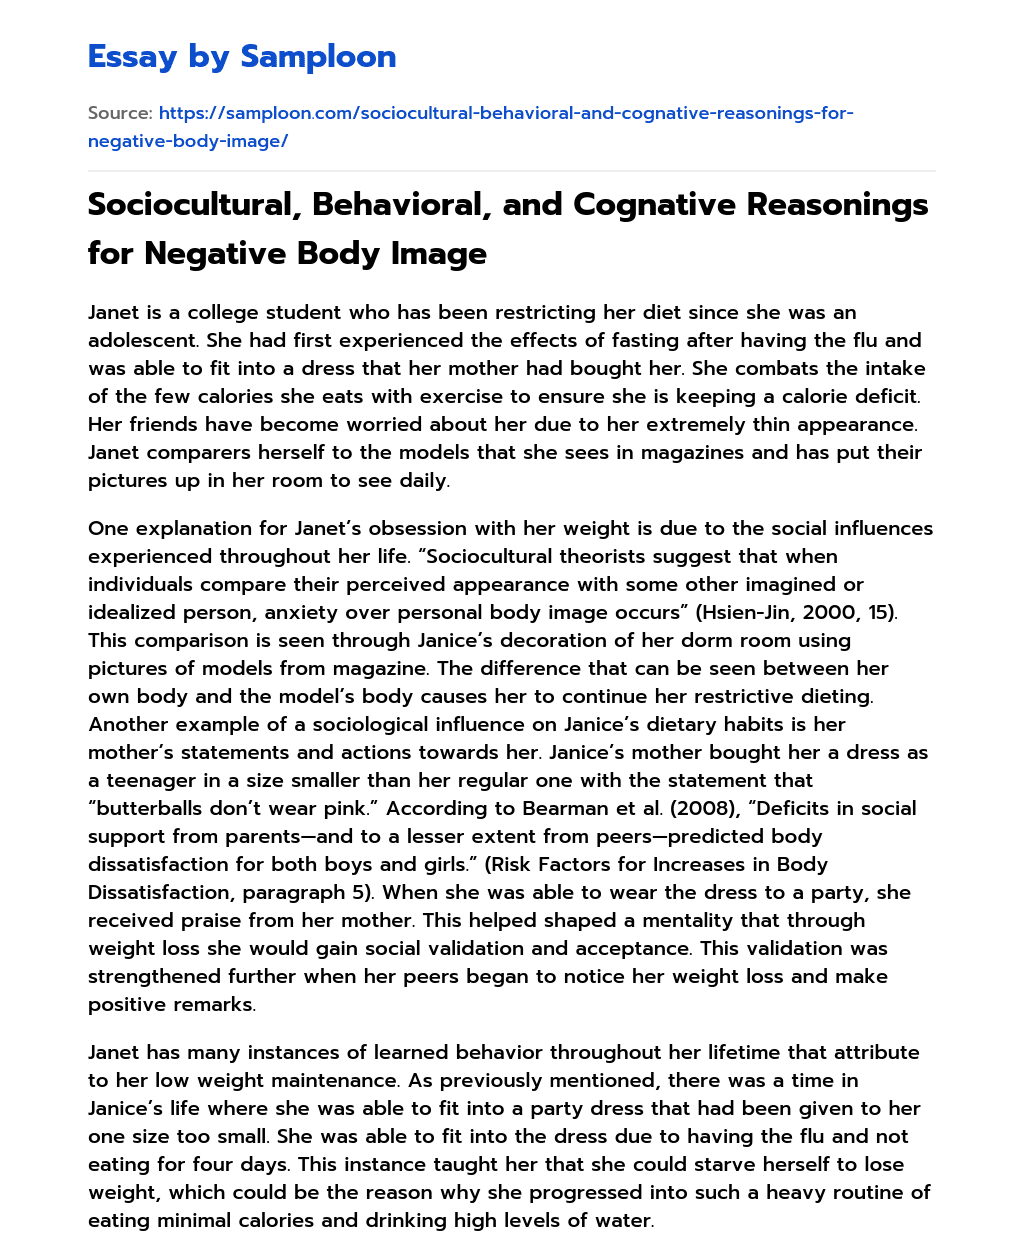 Sociocultural, Behavioral, and Cognative Reasonings for Negative Body Image essay